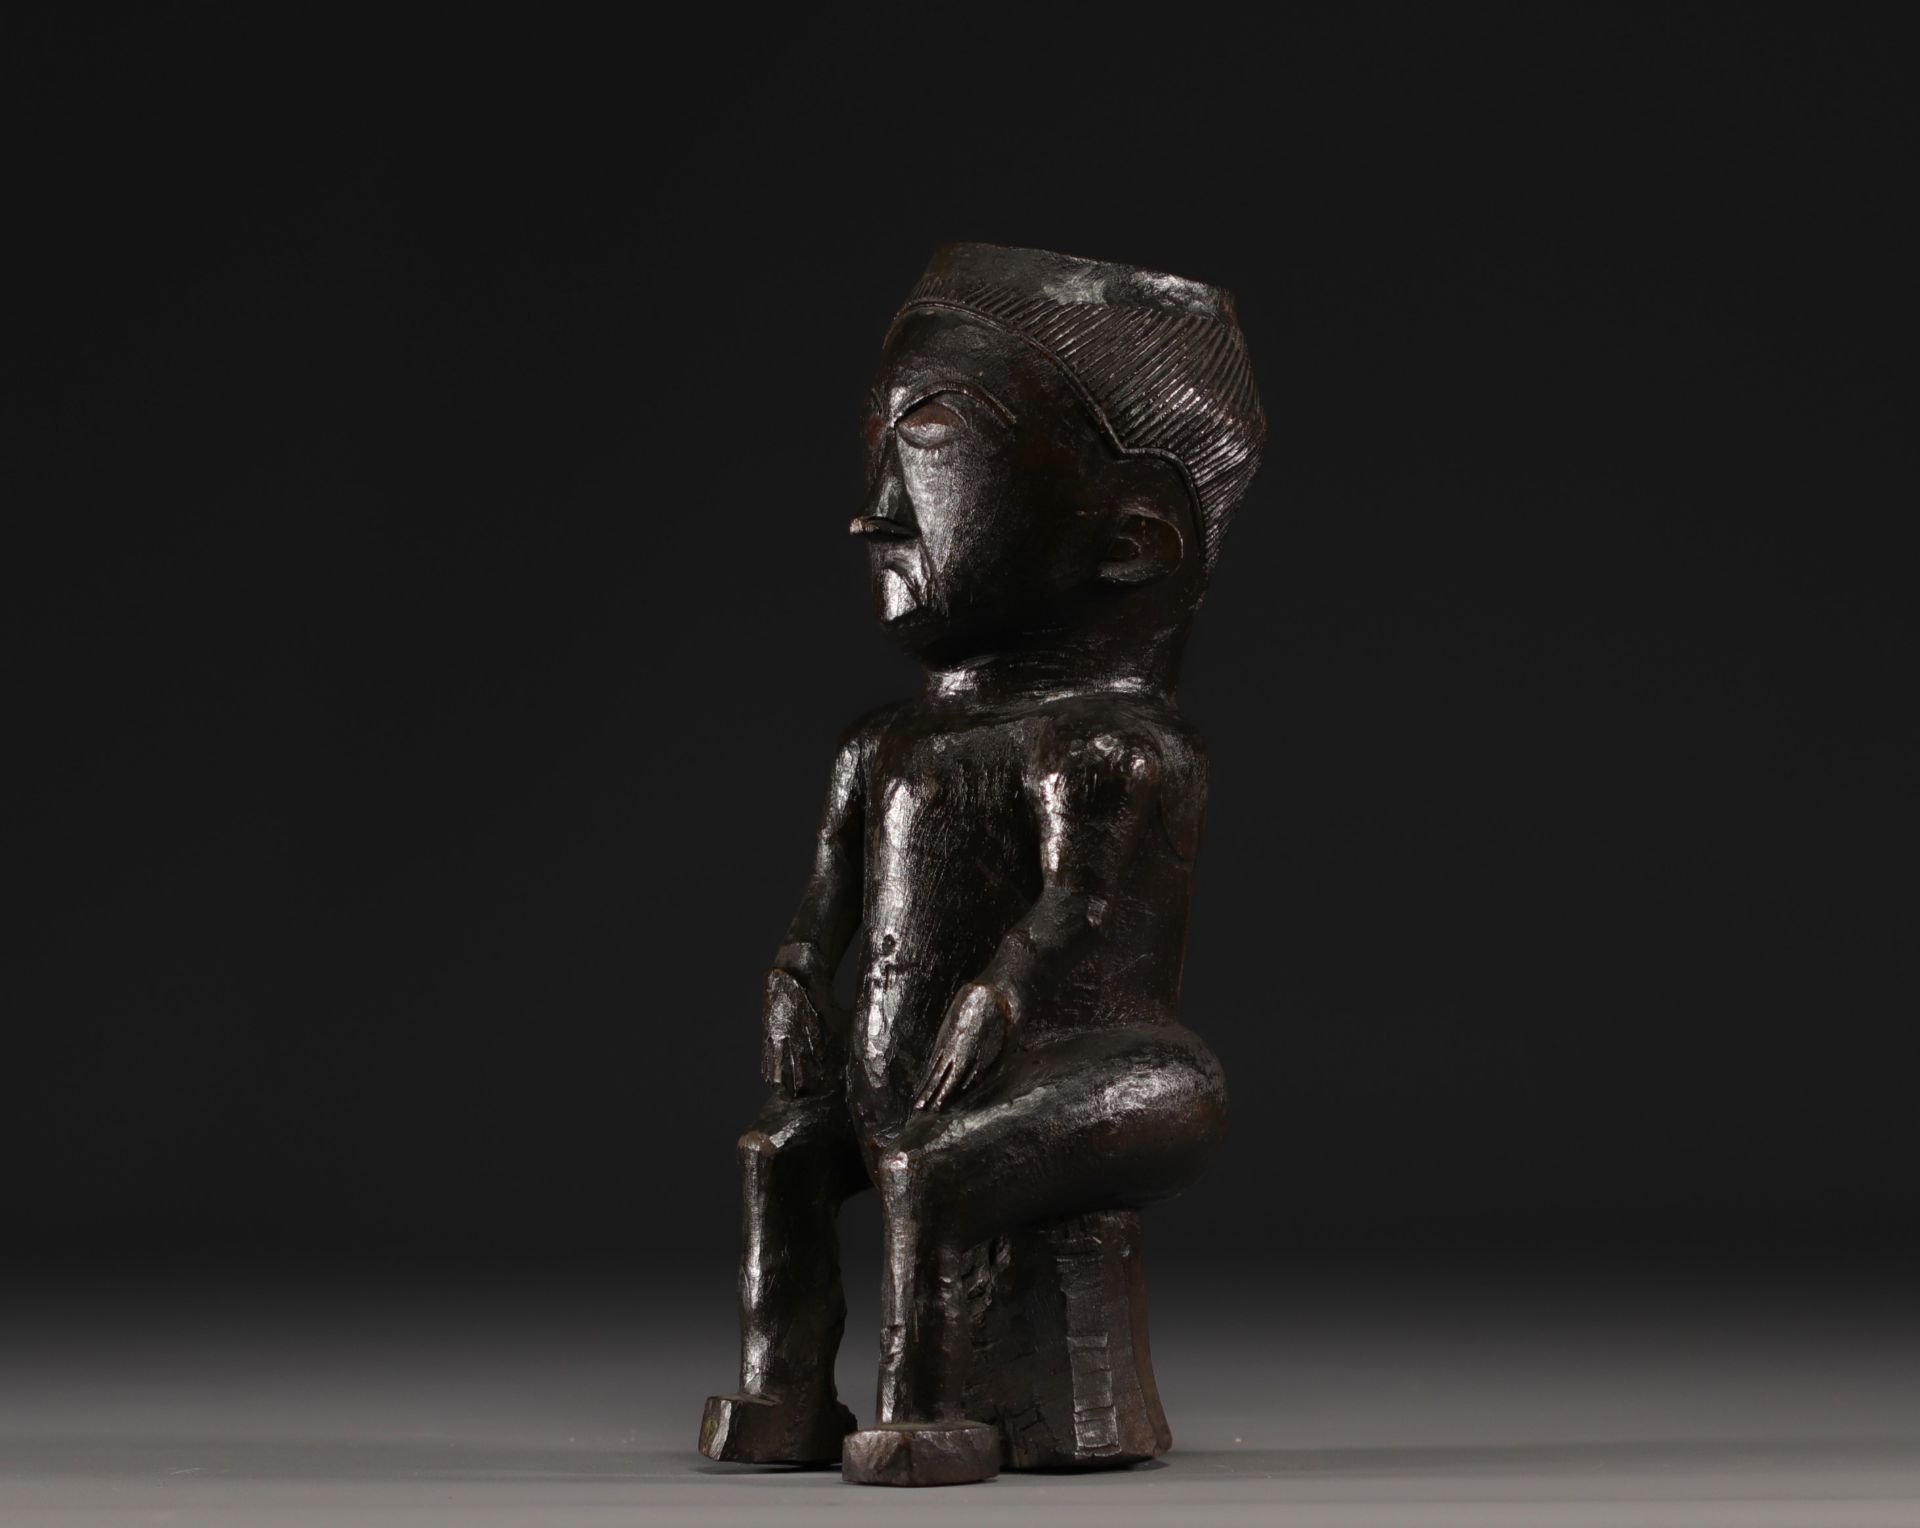 Large Kuba cup depicting a seated figure - Rep.Dem.Congo - Image 2 of 4